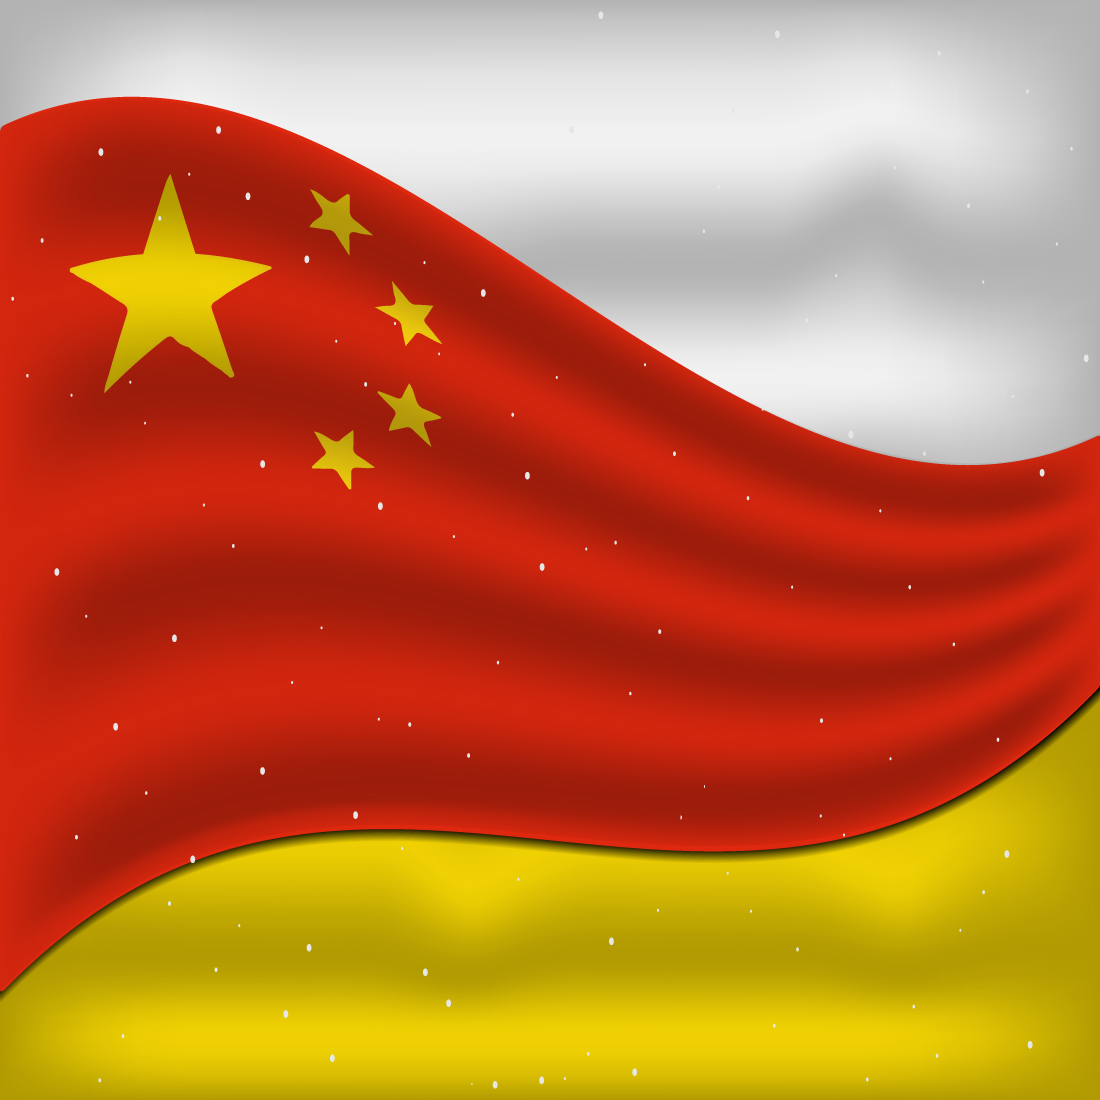 Unique image of the flag of China.